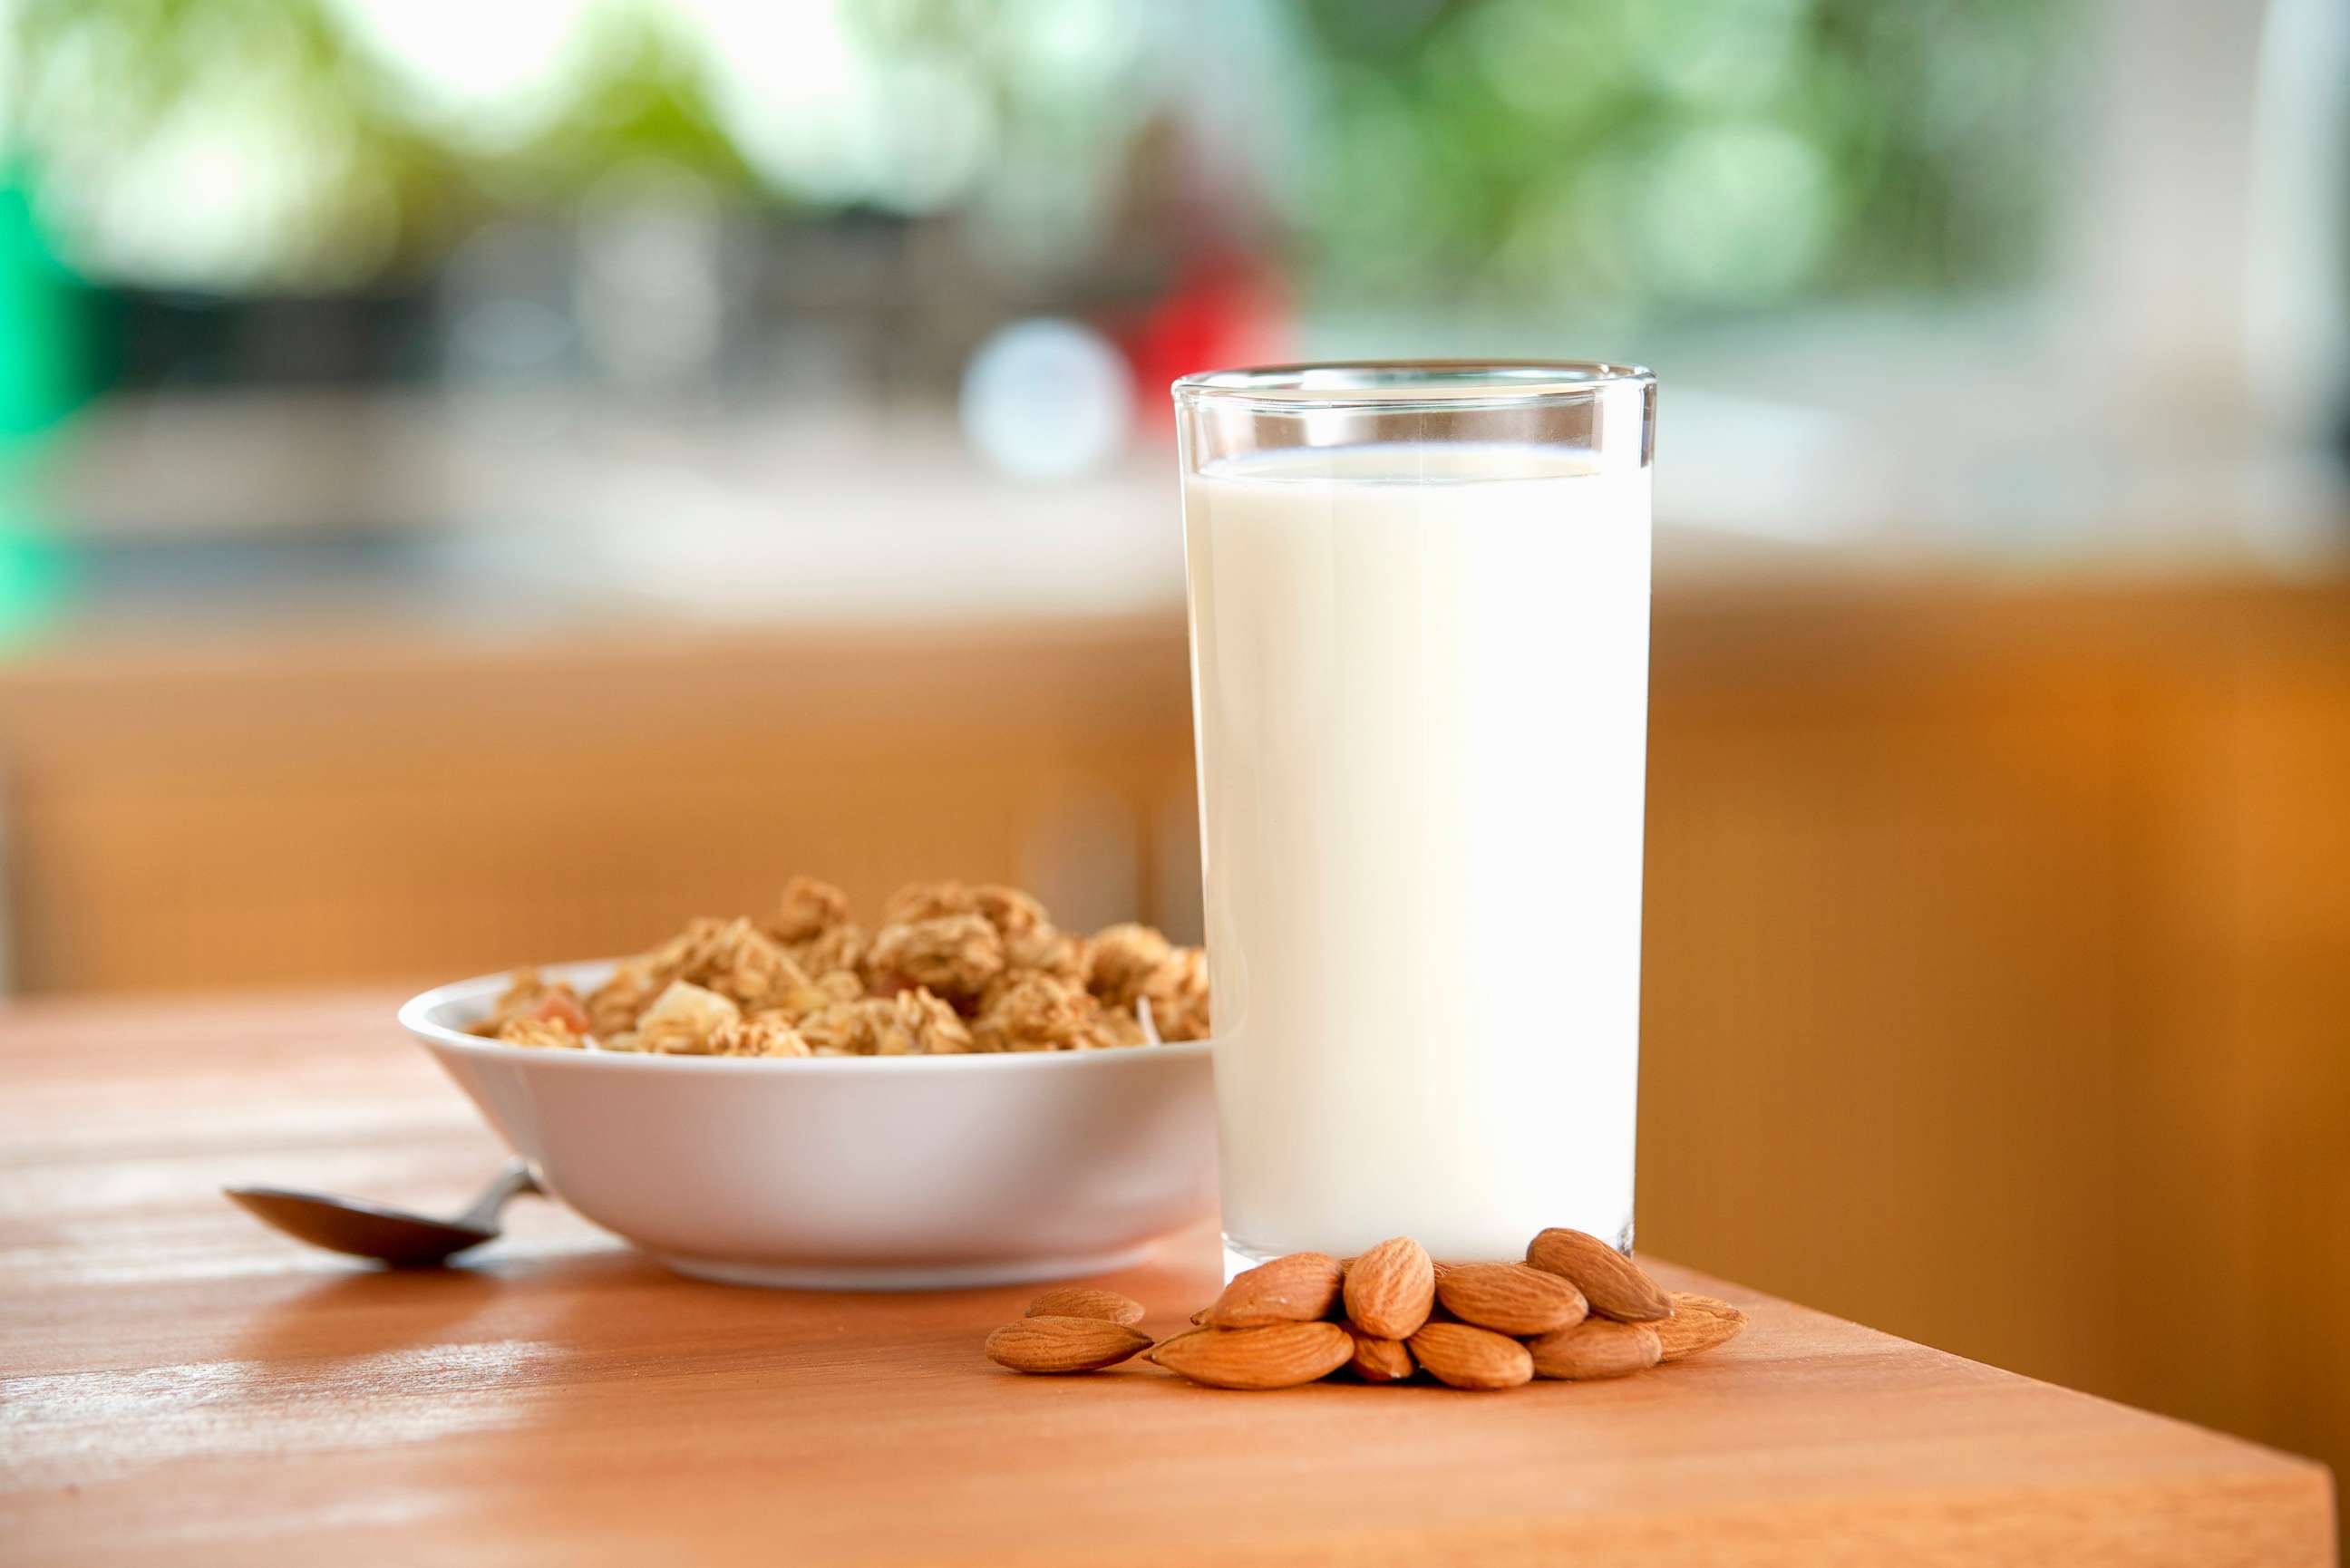 PHOTO: A glass of almond milk, almonds and cereals on a table, in this undated photo.